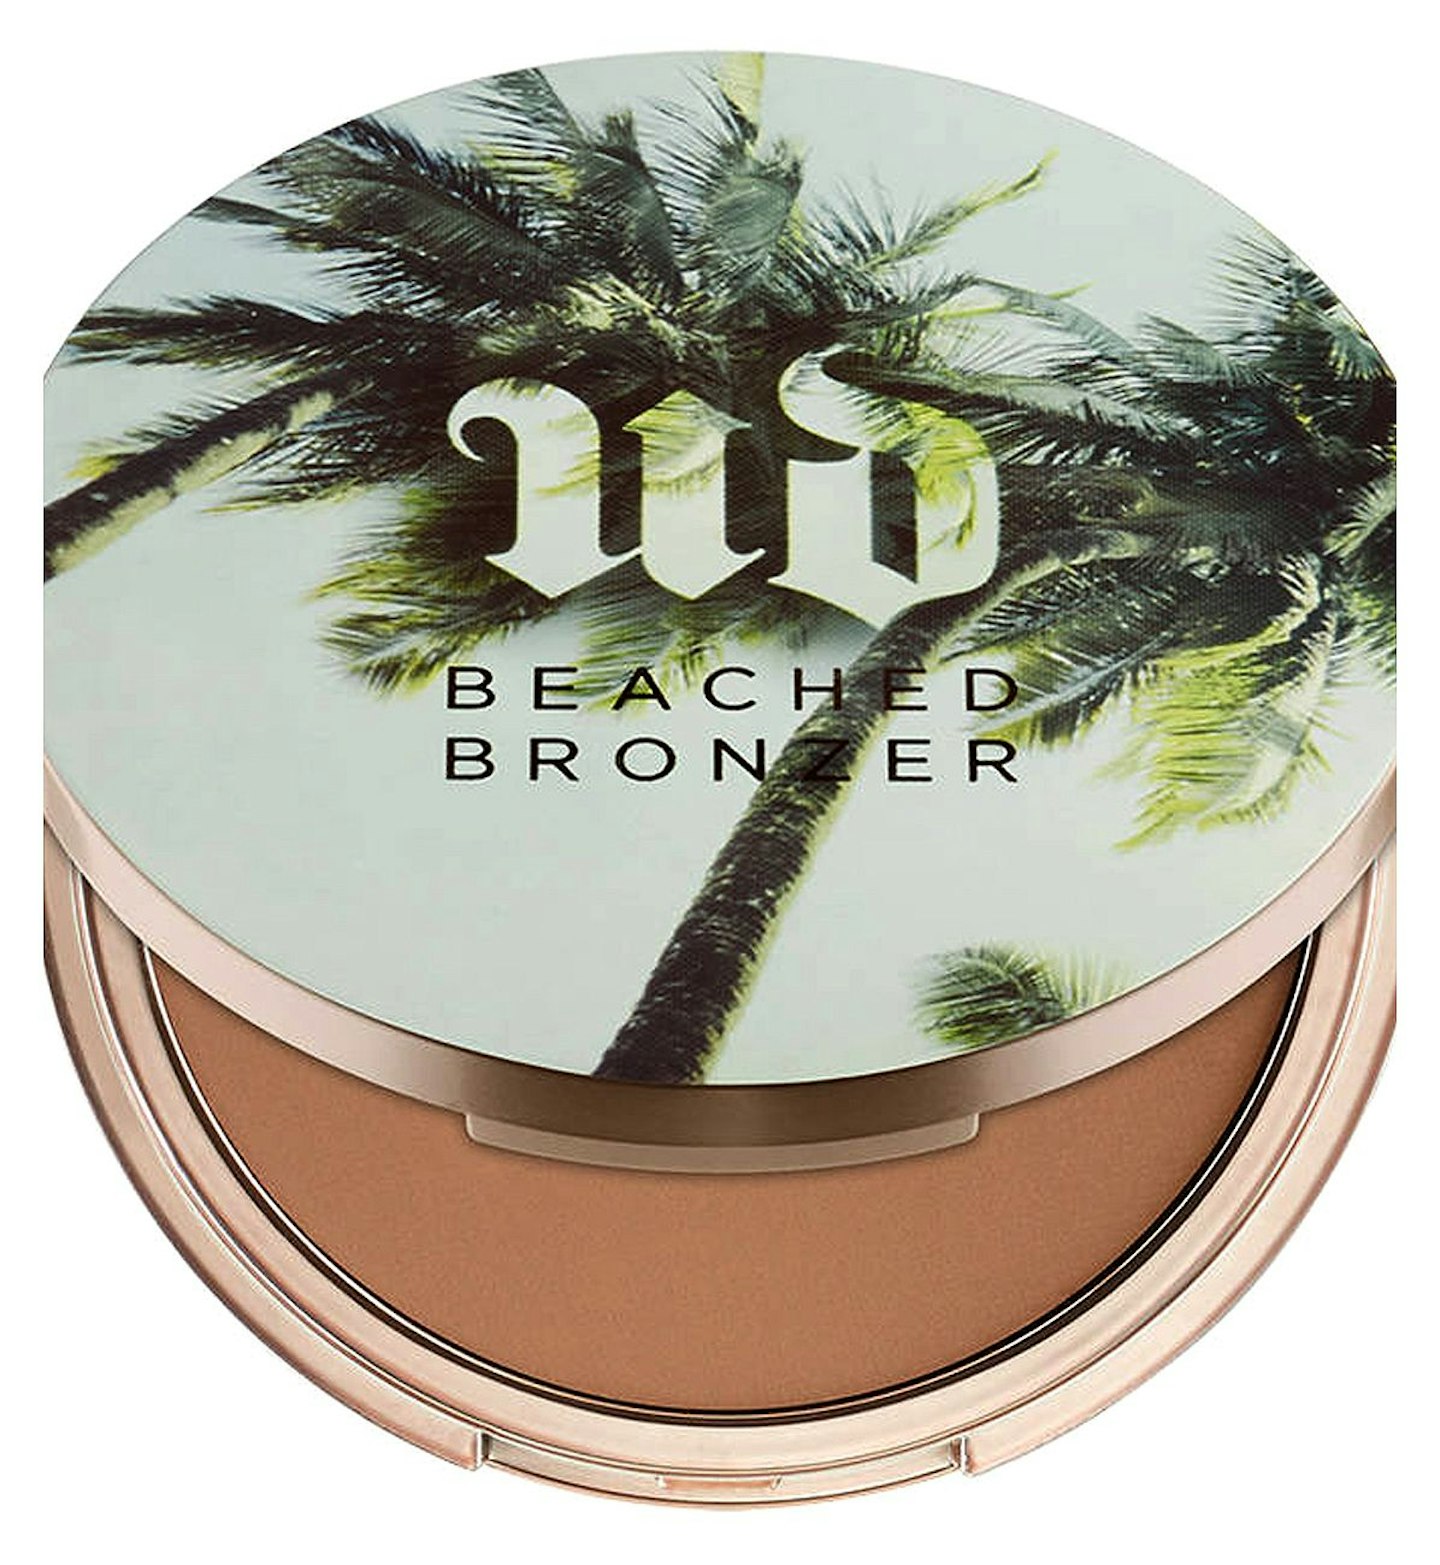 Urban Decay Beached Bronzer Bronzed, £23.50 from Boots